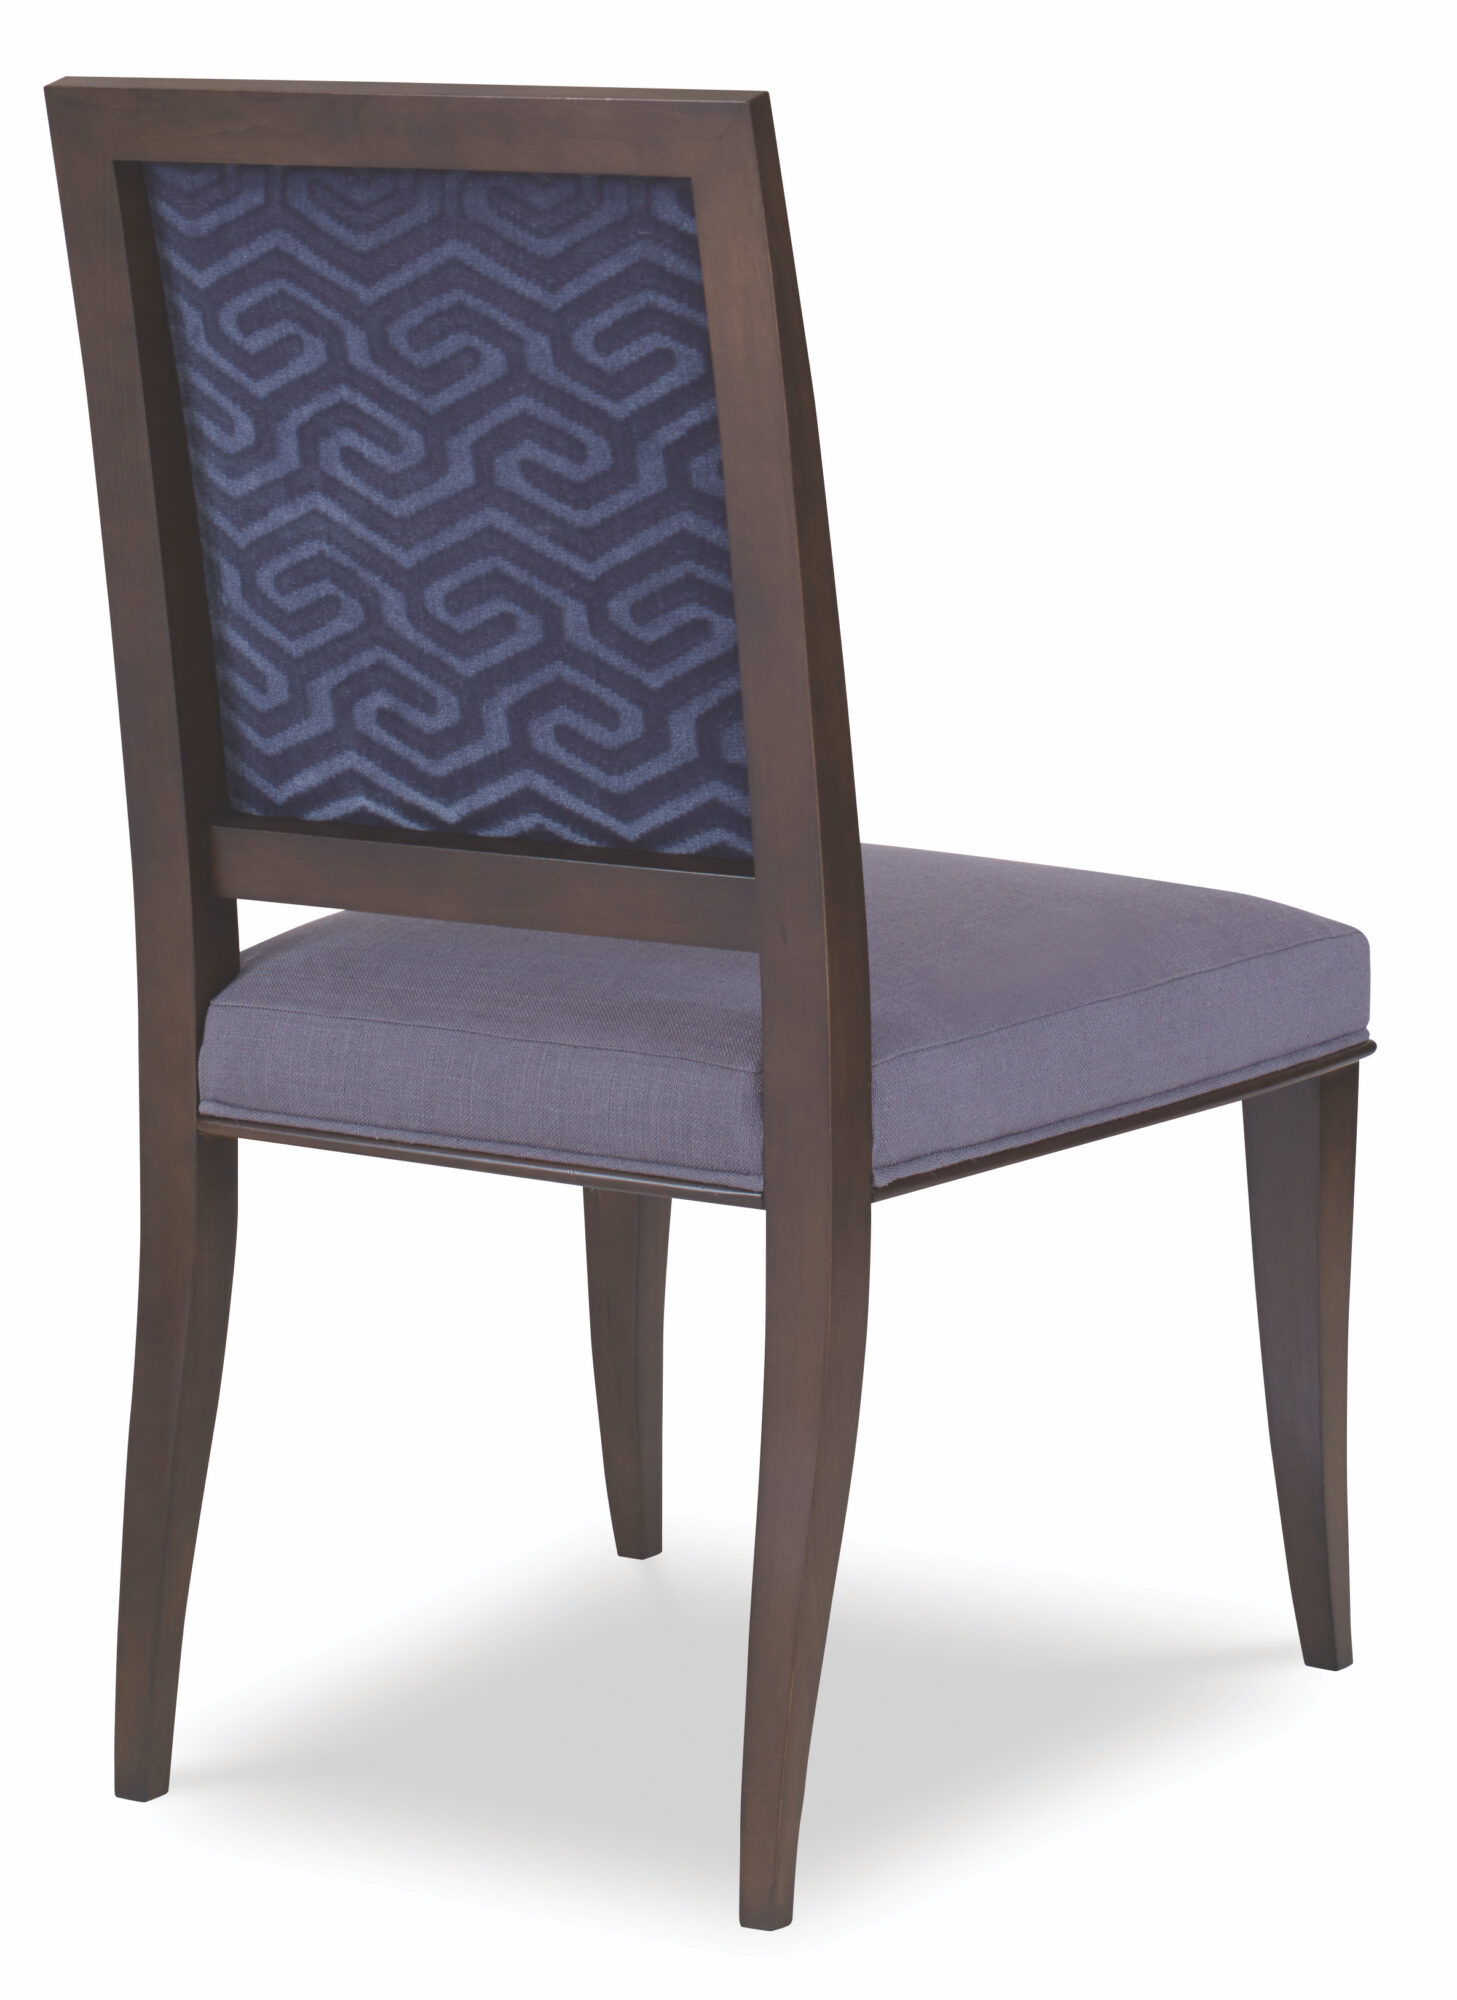 blue swirled dining chair is part of the hot seating trends